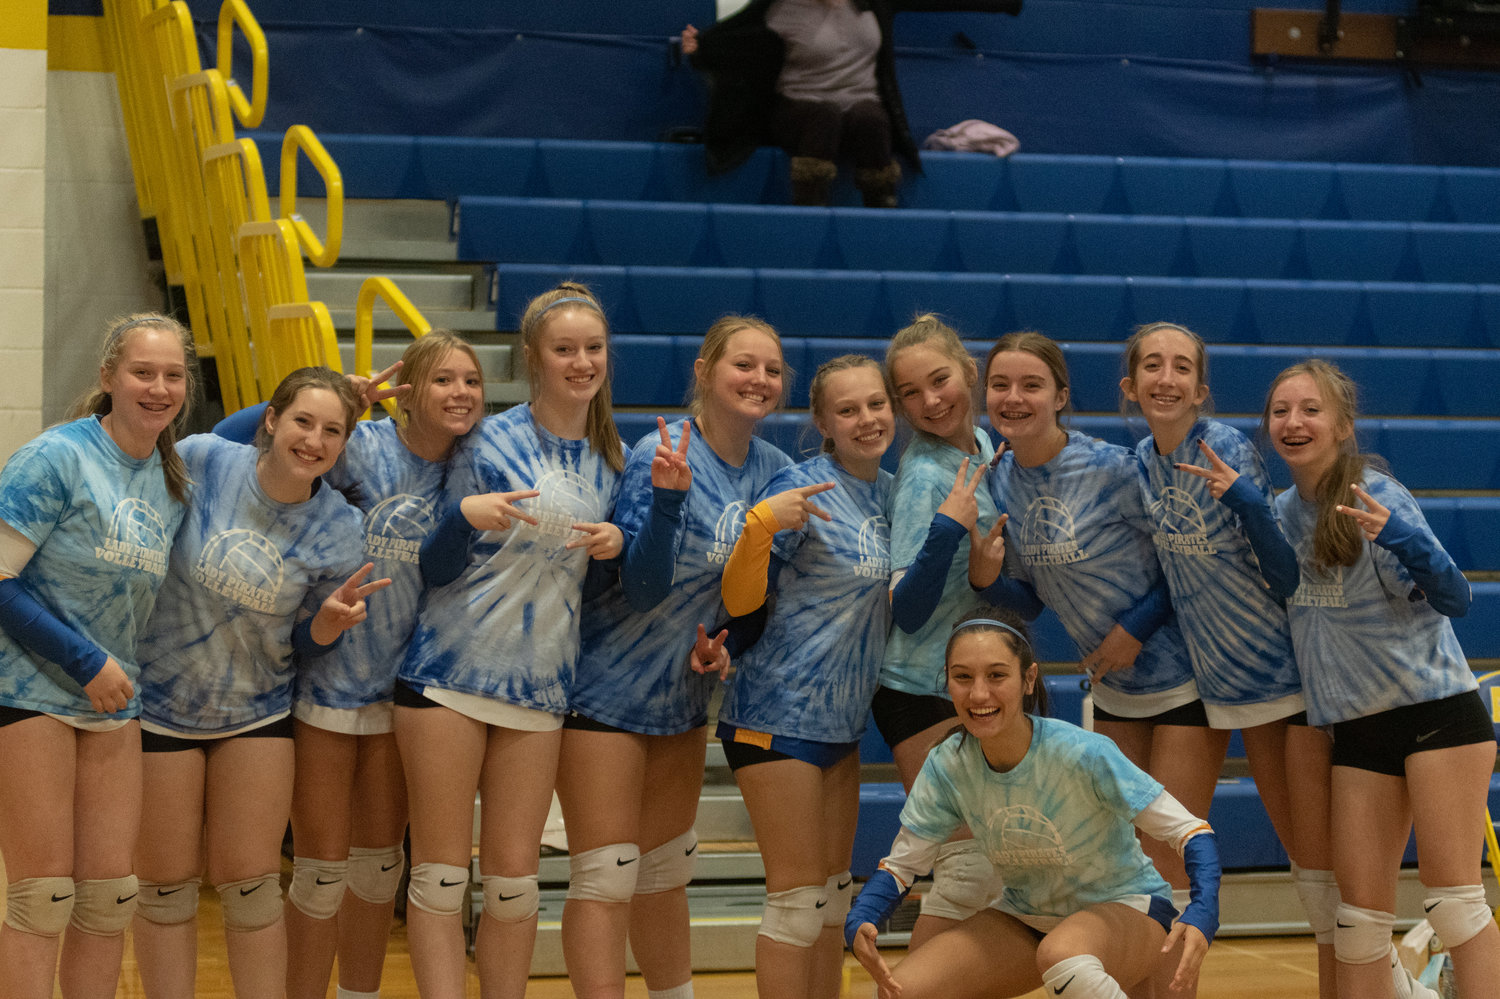 The Adna volleyball team poses for a photo before taking on Ocosta in the District 4 quarterfinals Oct. 30.